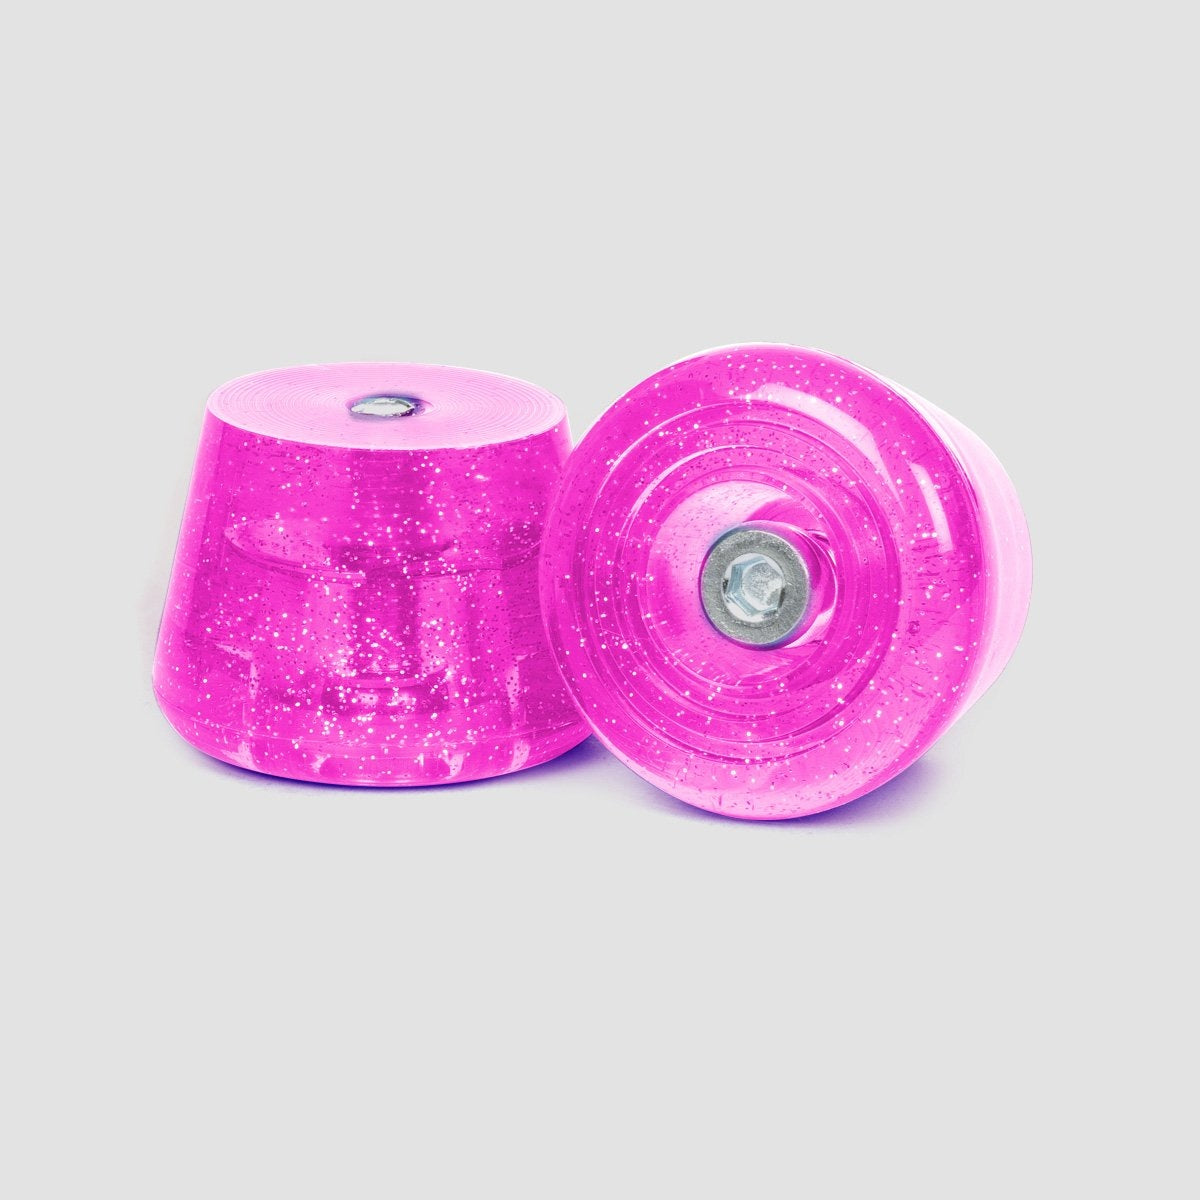 Rio Roller Toe Stoppers x2 Pink Glitter - Skates